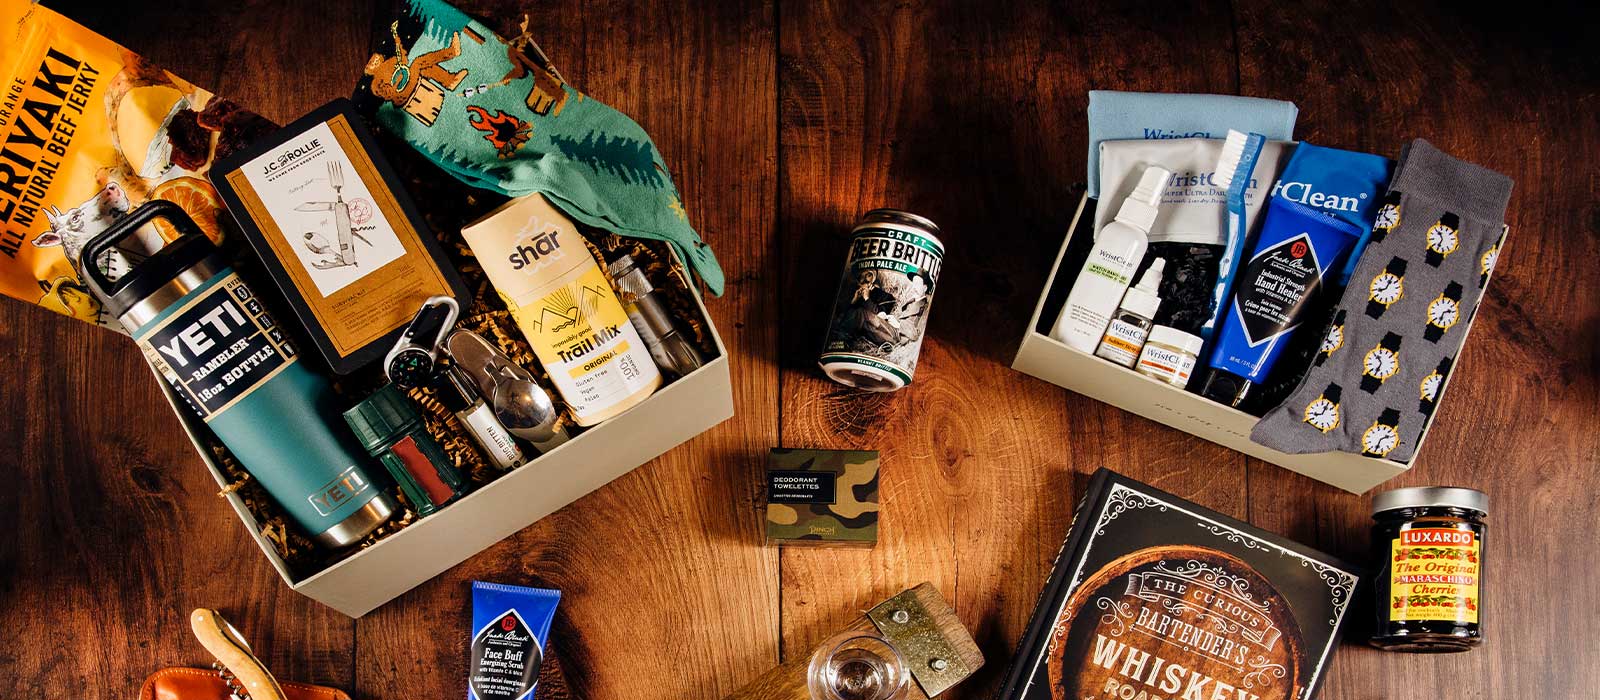 The BroBox—The Perfect Gift Box for Men